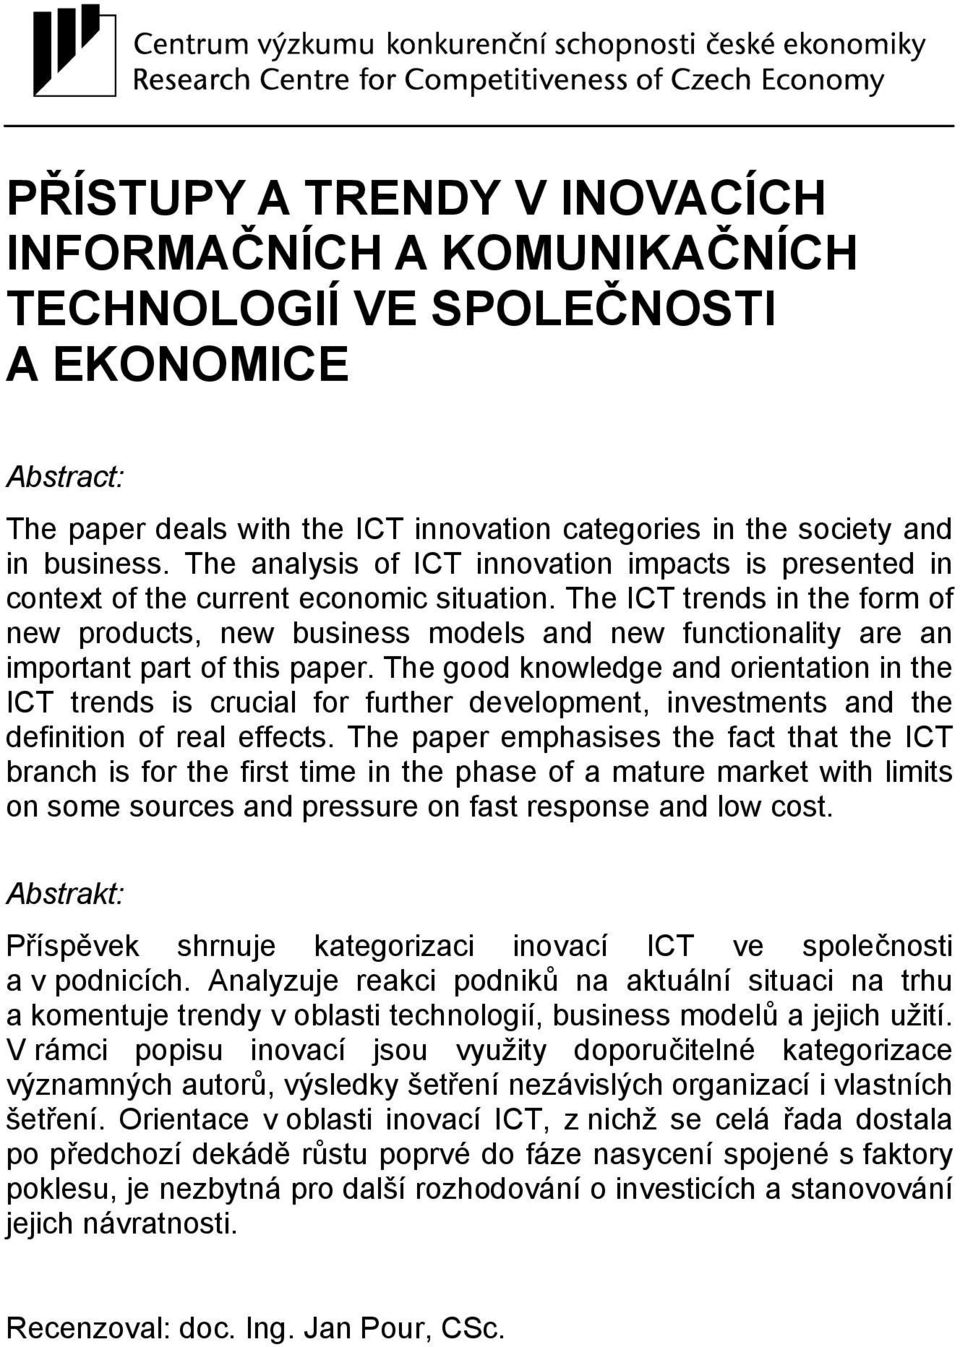 The ICT trends in the form of new products, new business models and new functionality are an important part of this paper.